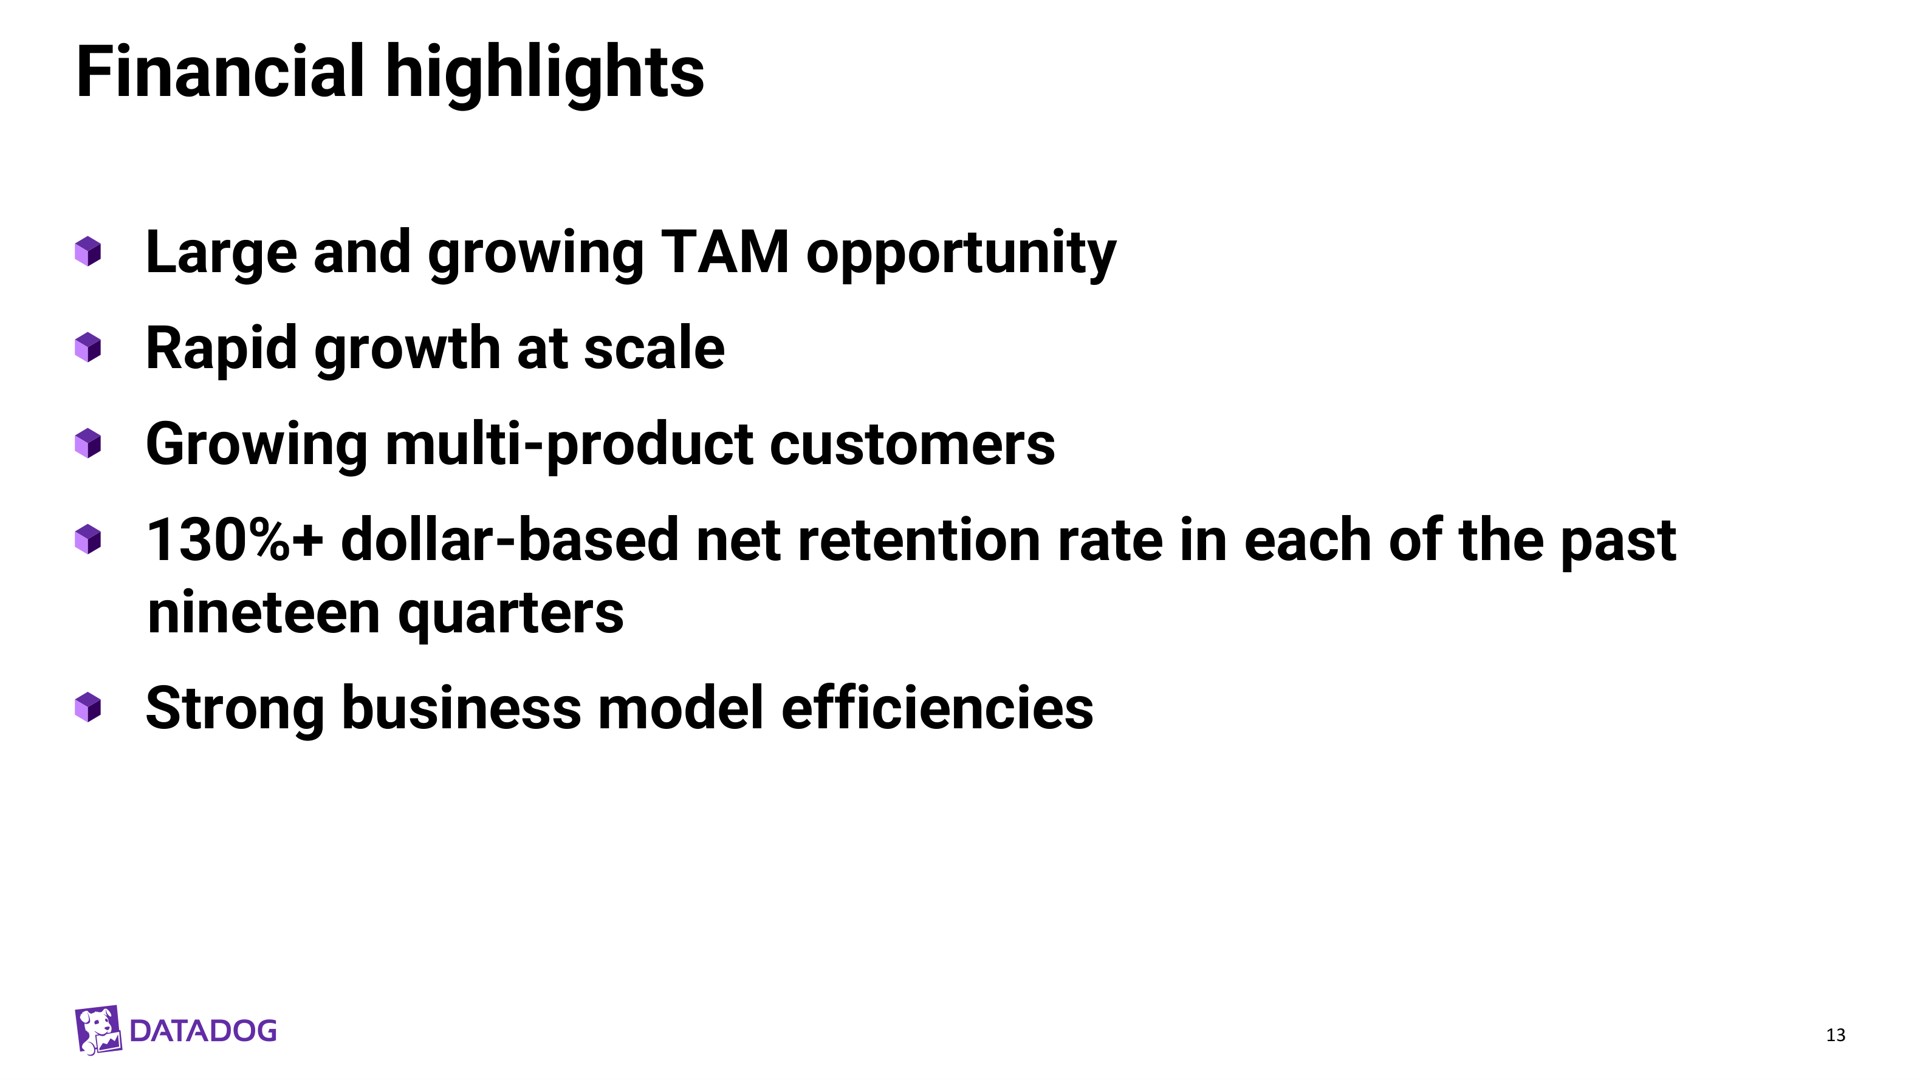 financial highlights large and growing tam opportunity rapid growth at scale growing product customers dollar based net retention rate in each of the past nineteen quarters strong business model efficiencies | Datadog